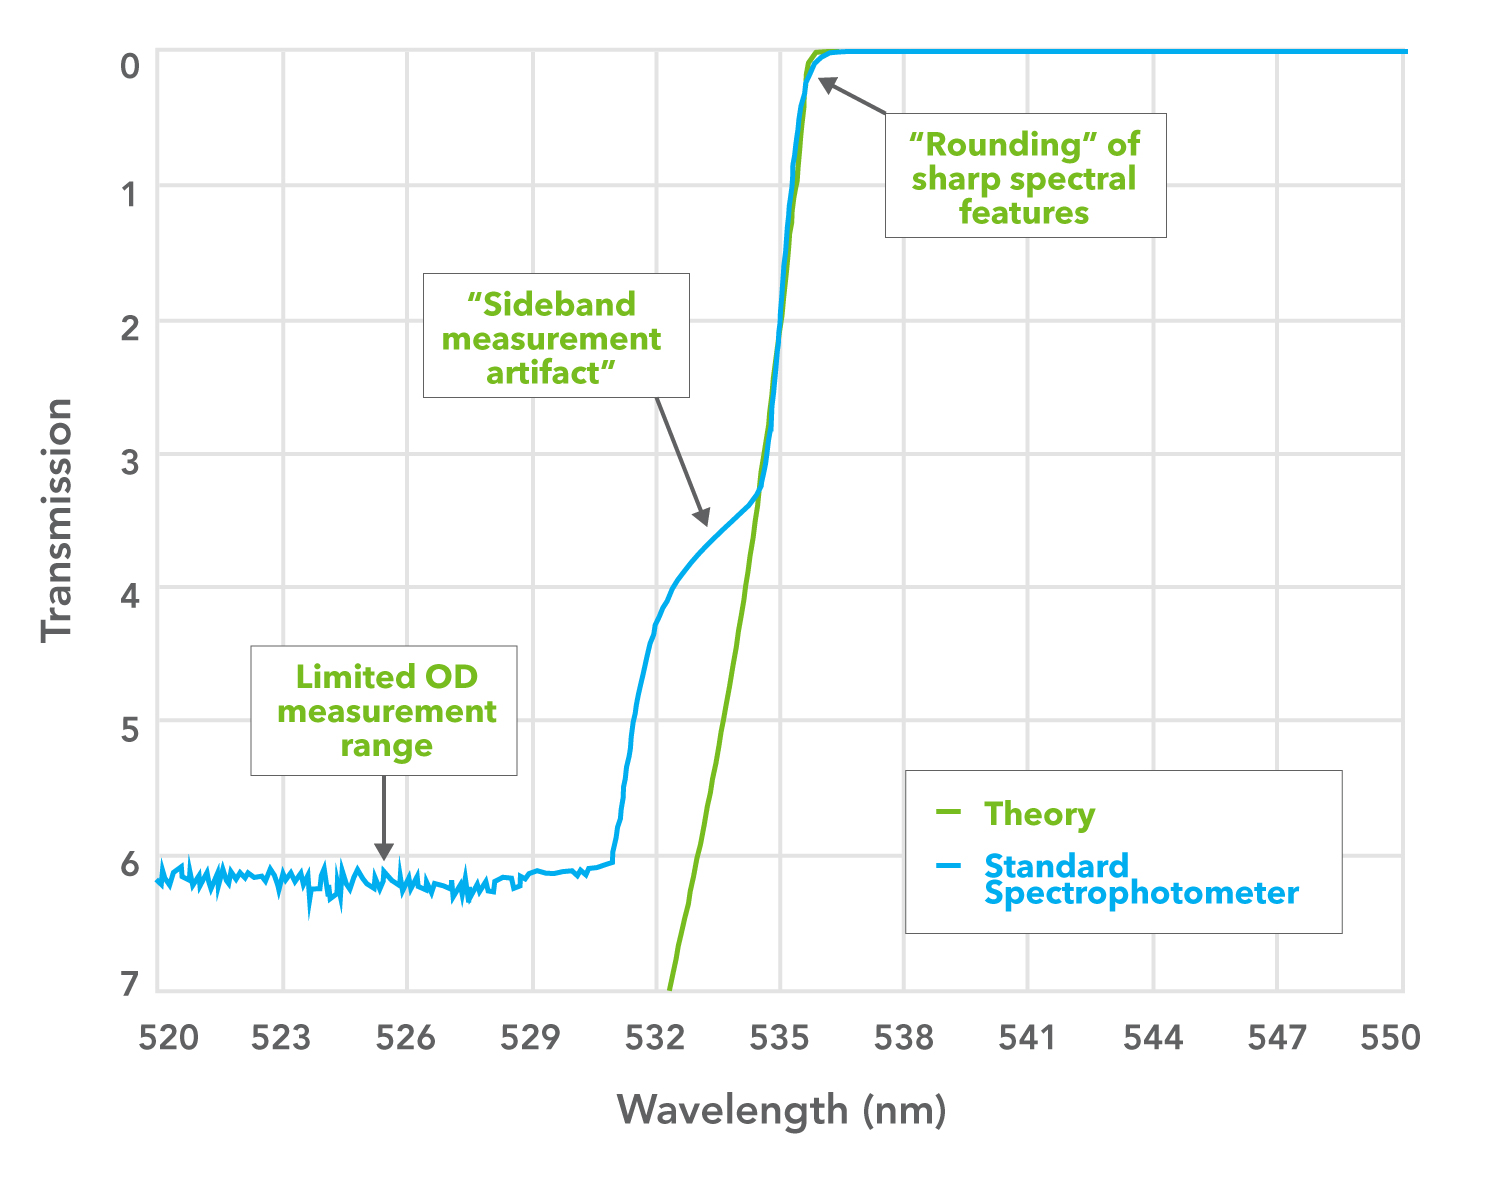 Measurement artifacts observed using a commercial spectrophotometer